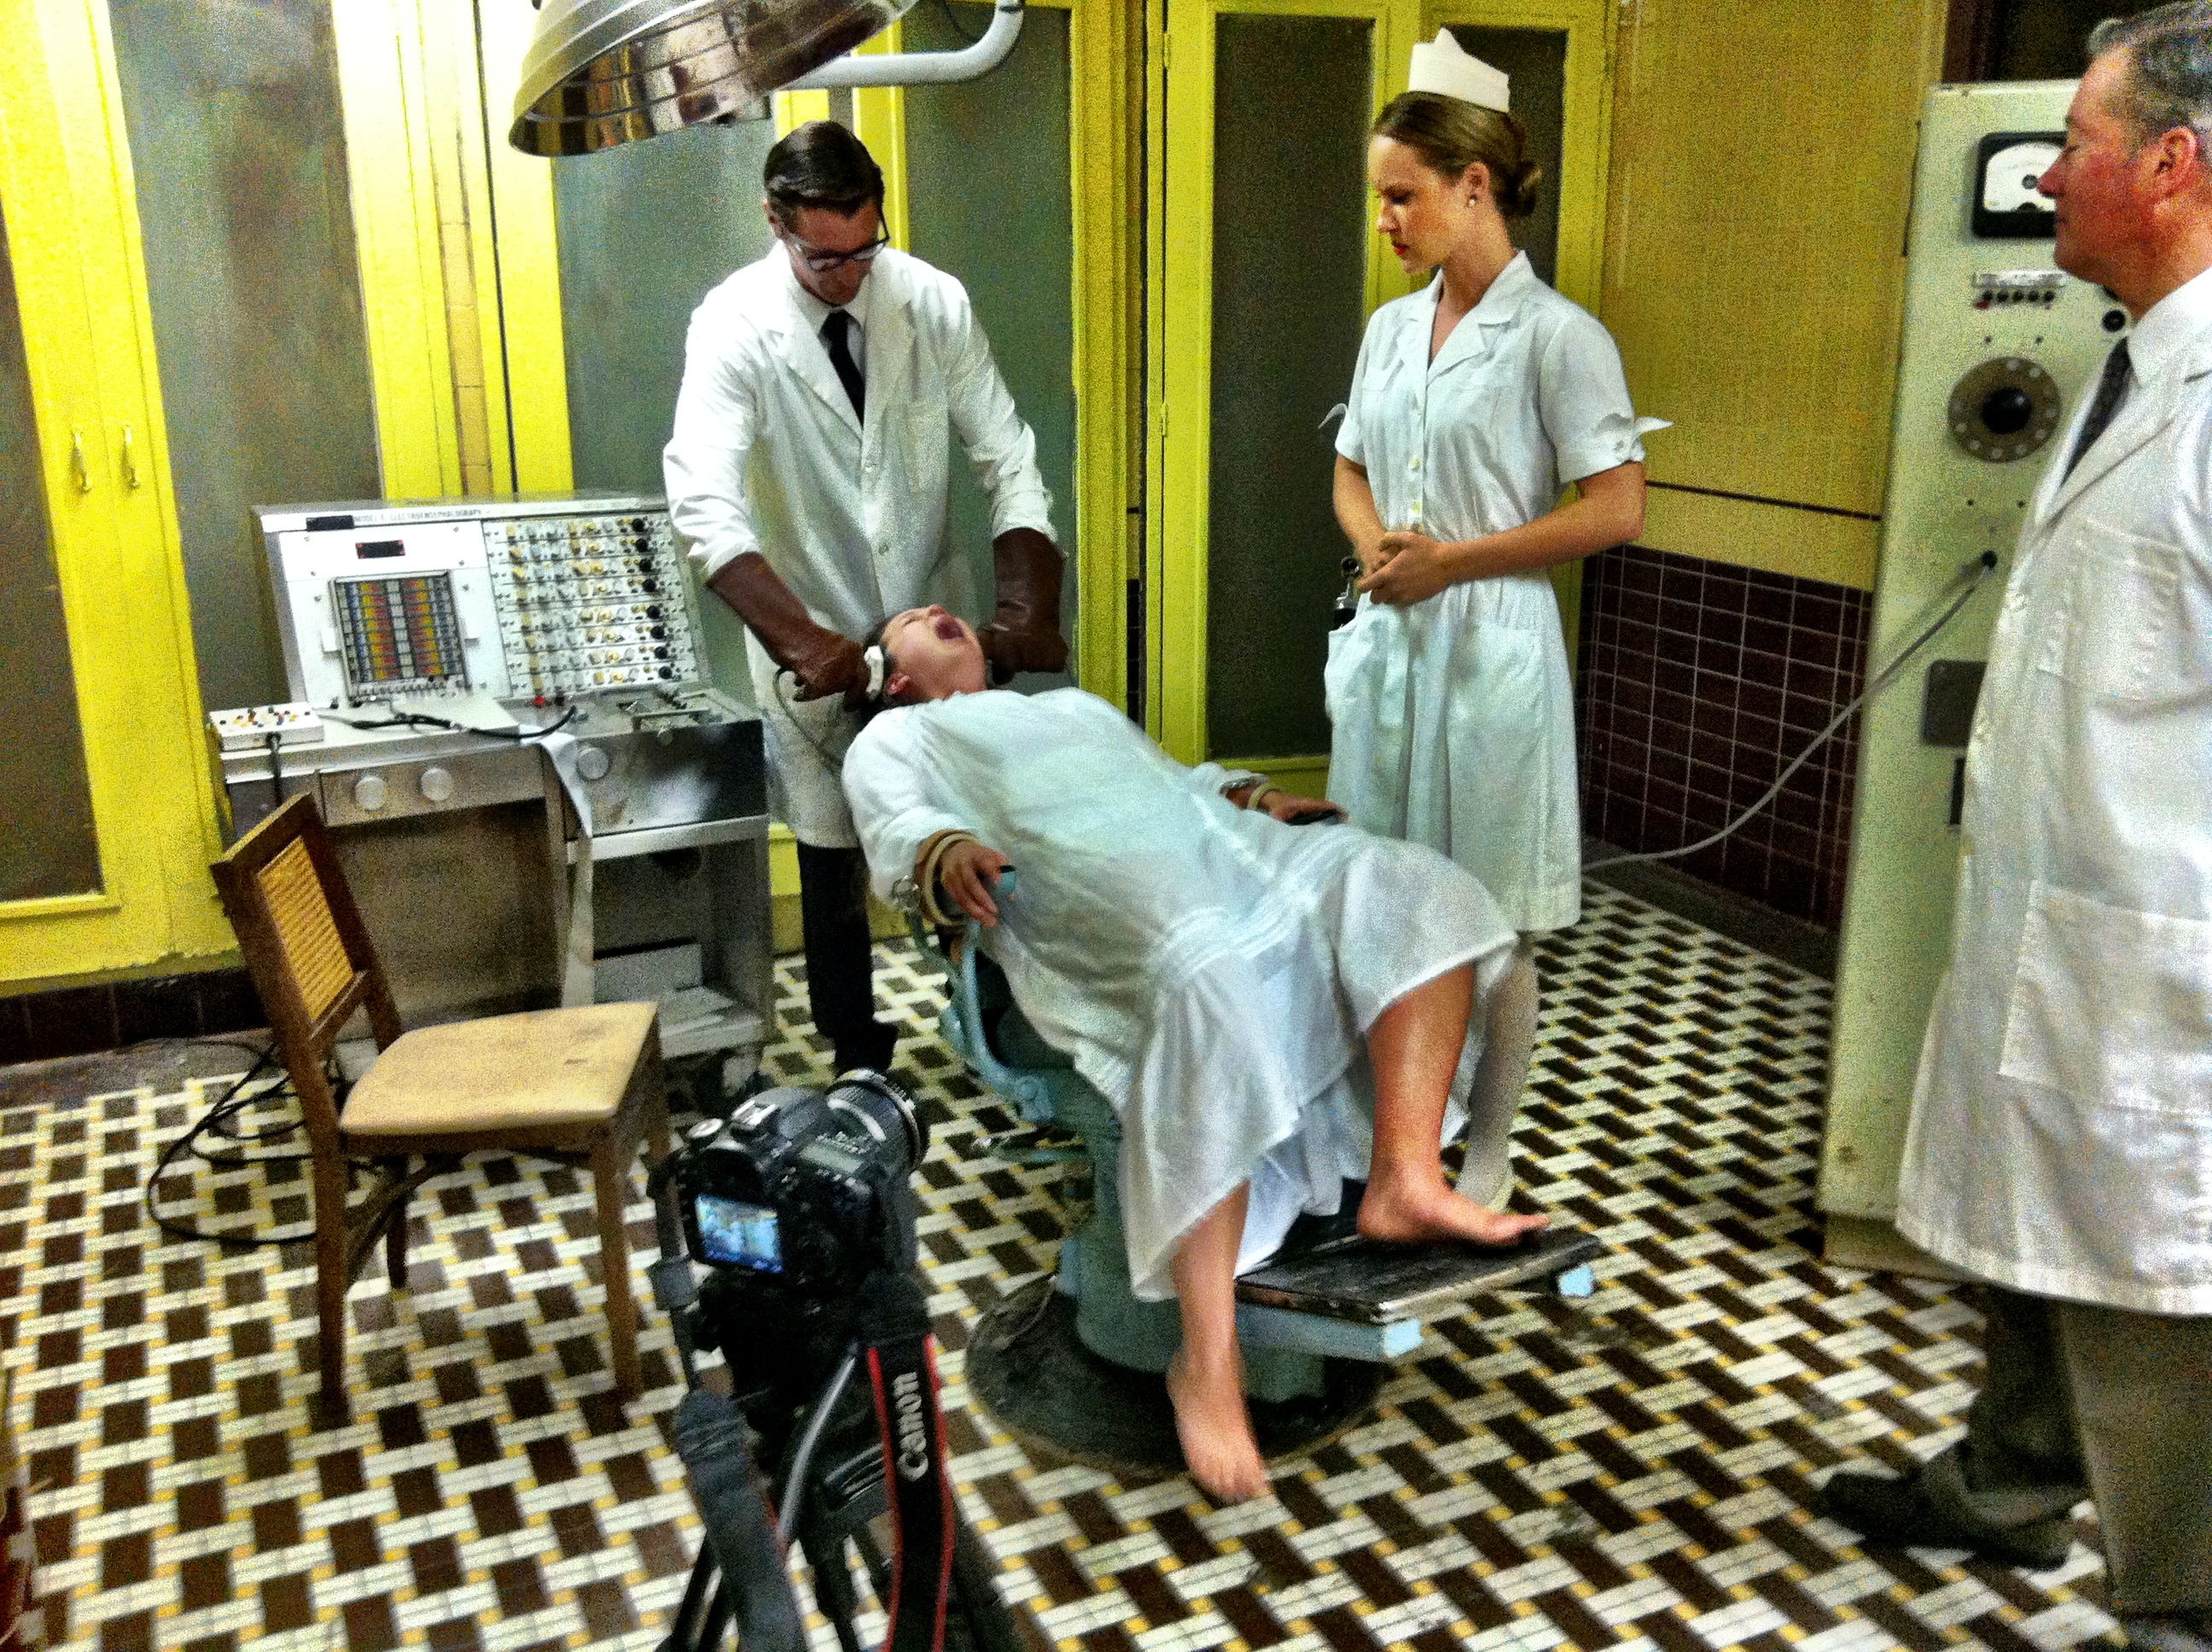 On the set of The Whispering Dead as Nurse Childers, with Hunter Williams, Brooke Johnson, and Sewell Whitney.